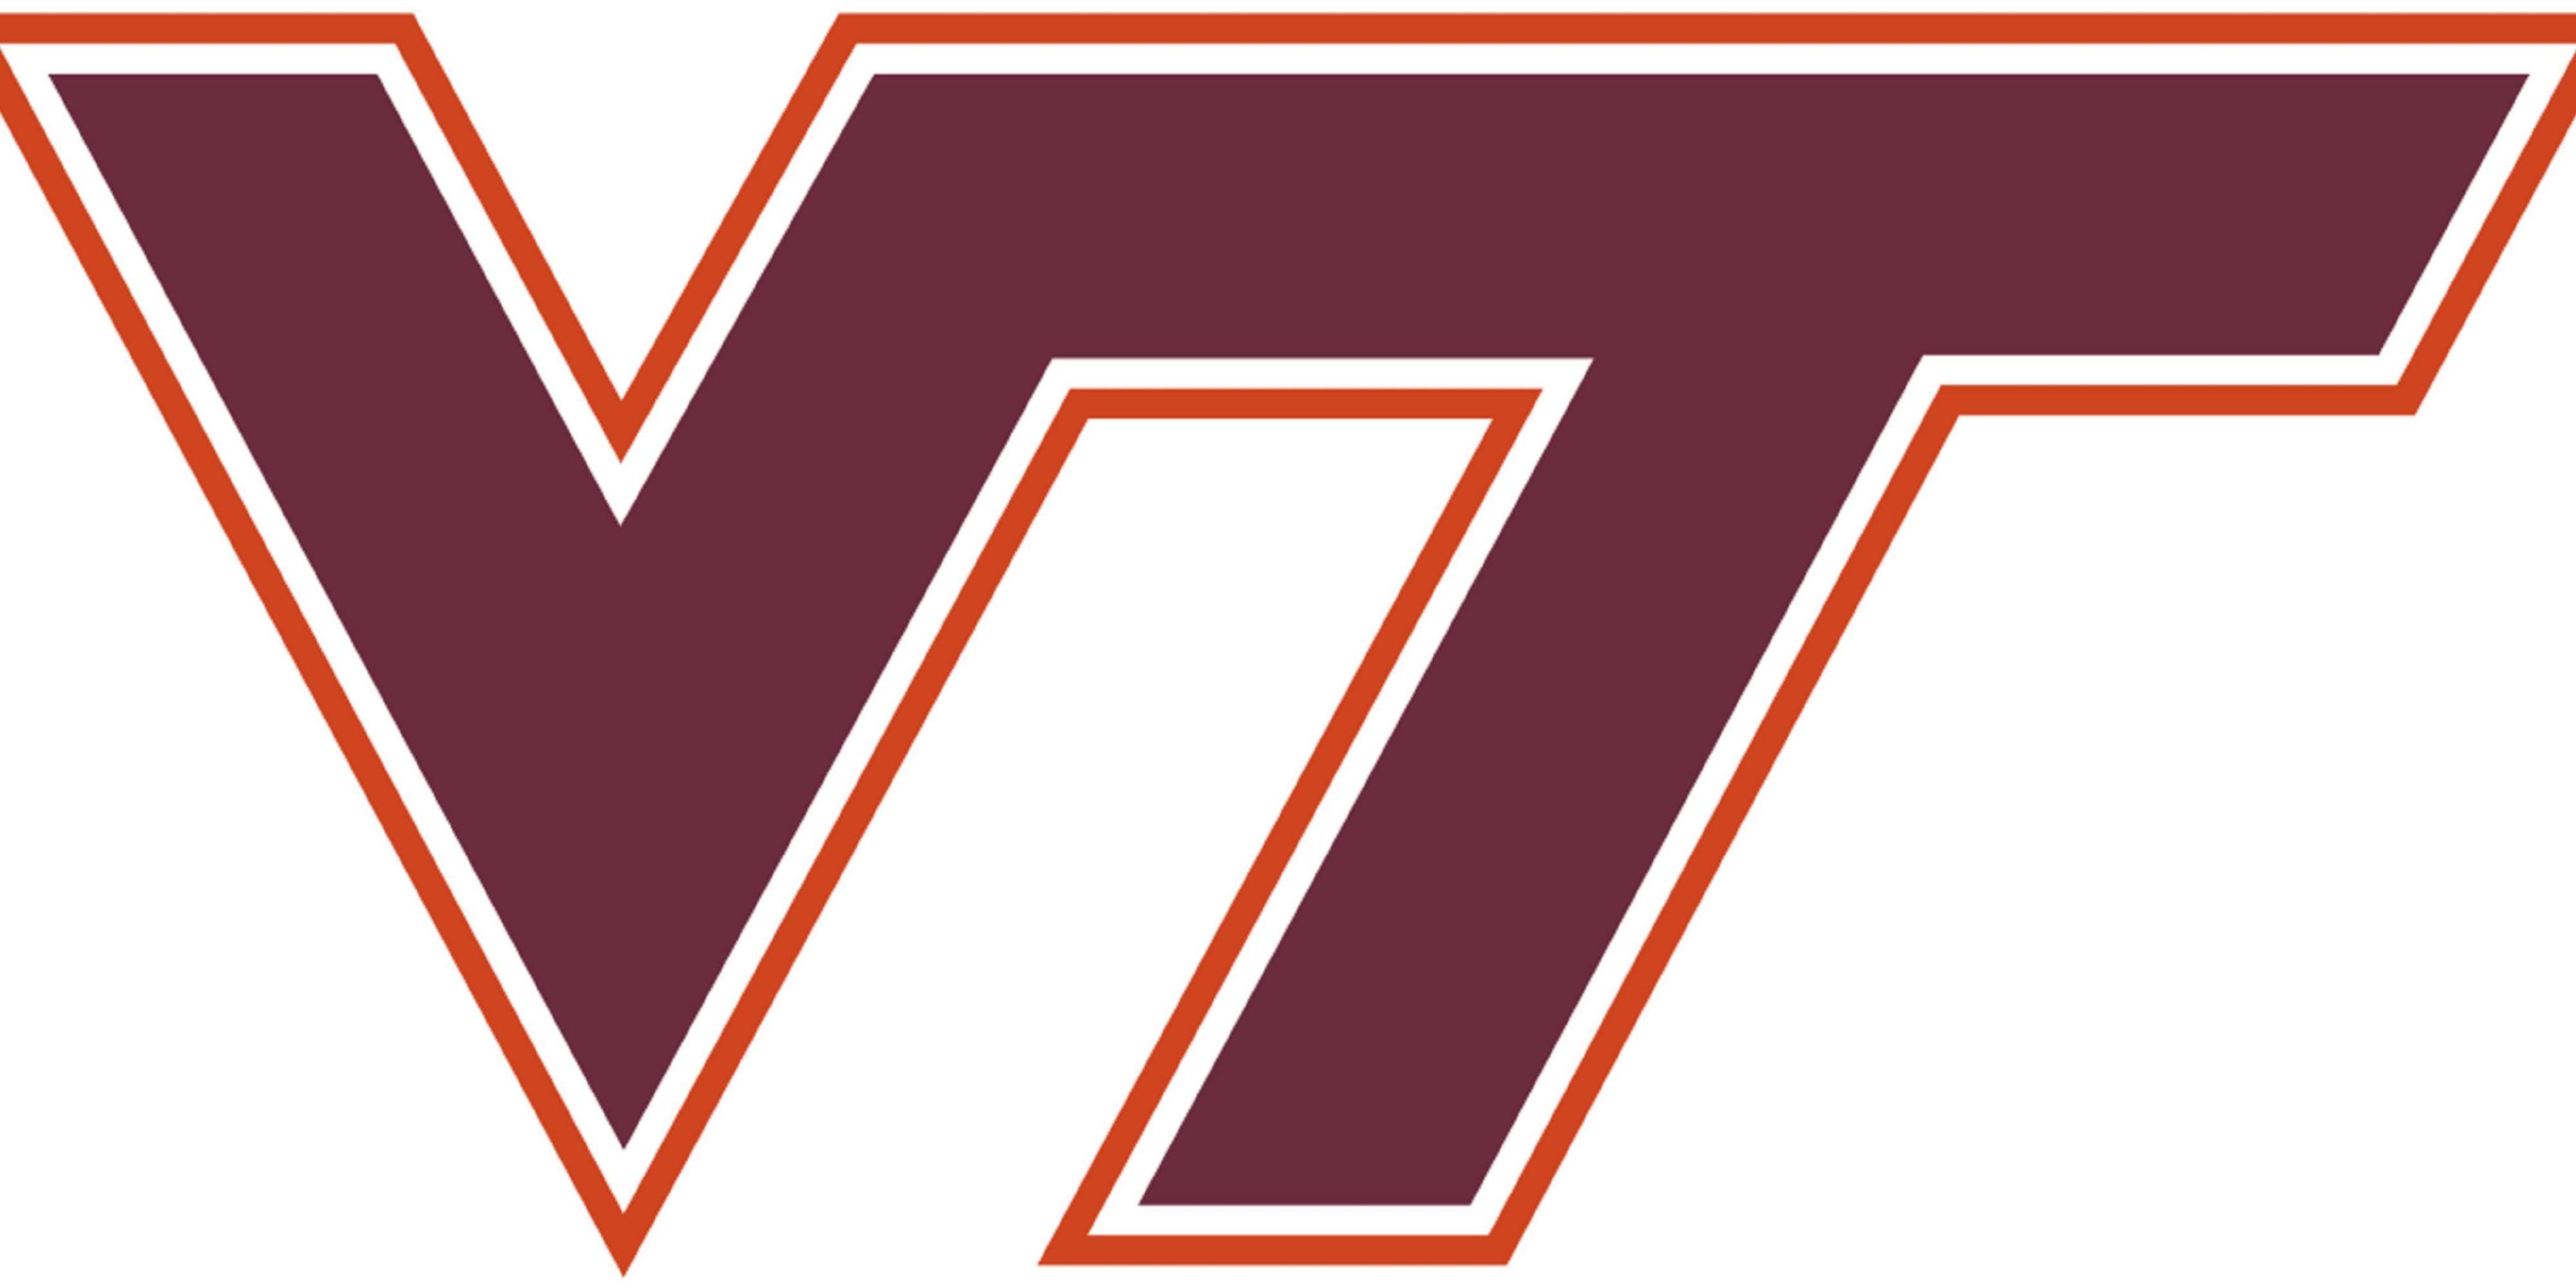 Coming to an event at Virginia Tech? Avoid the in town traffic and stay with us, our hotel is an extremely convenient hotel option for all of the academic and athletic events hosted at the university. 